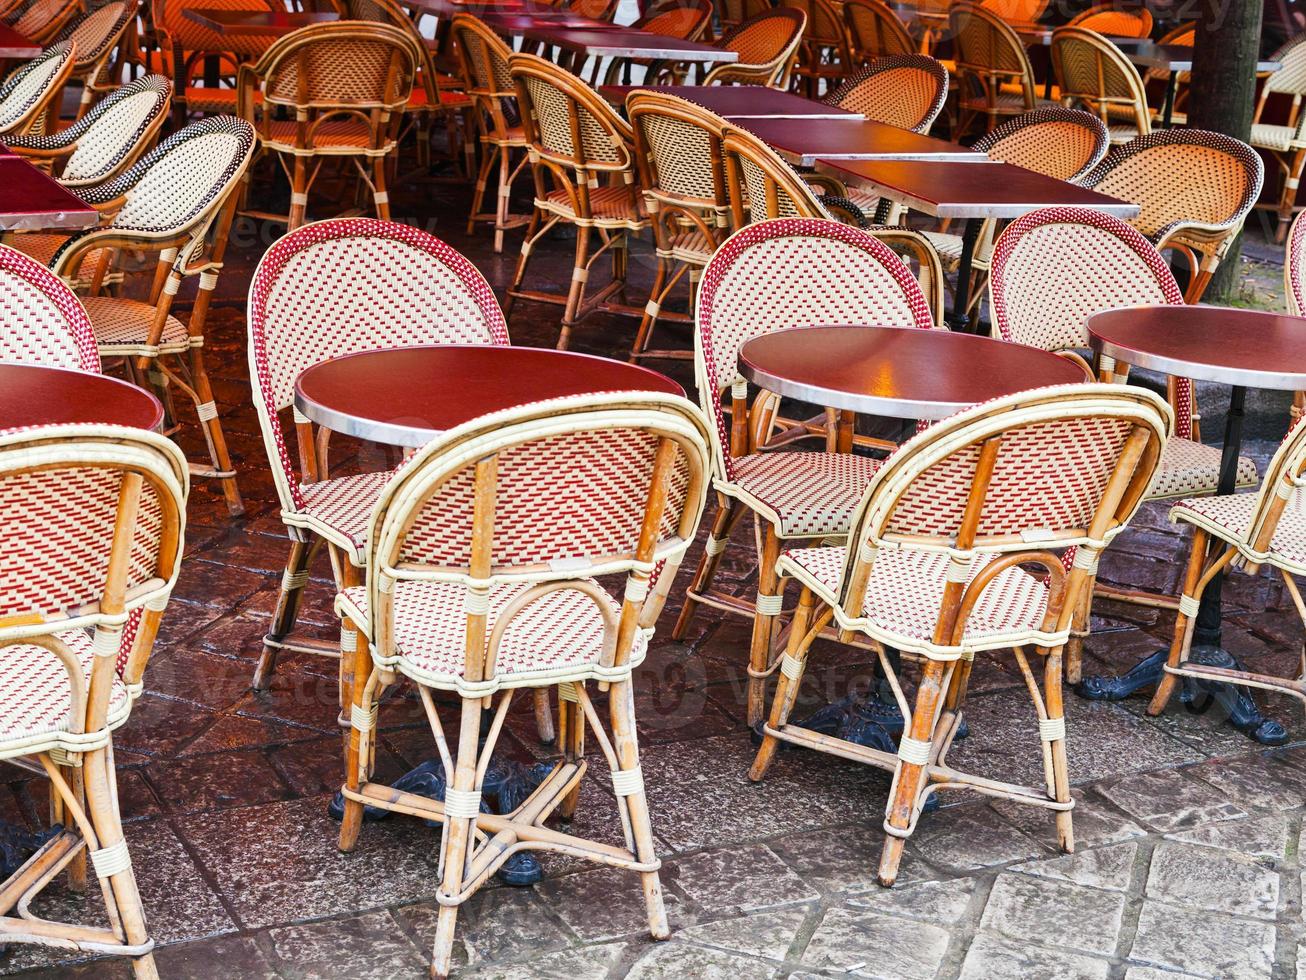 cane-chairs in paris cafe photo